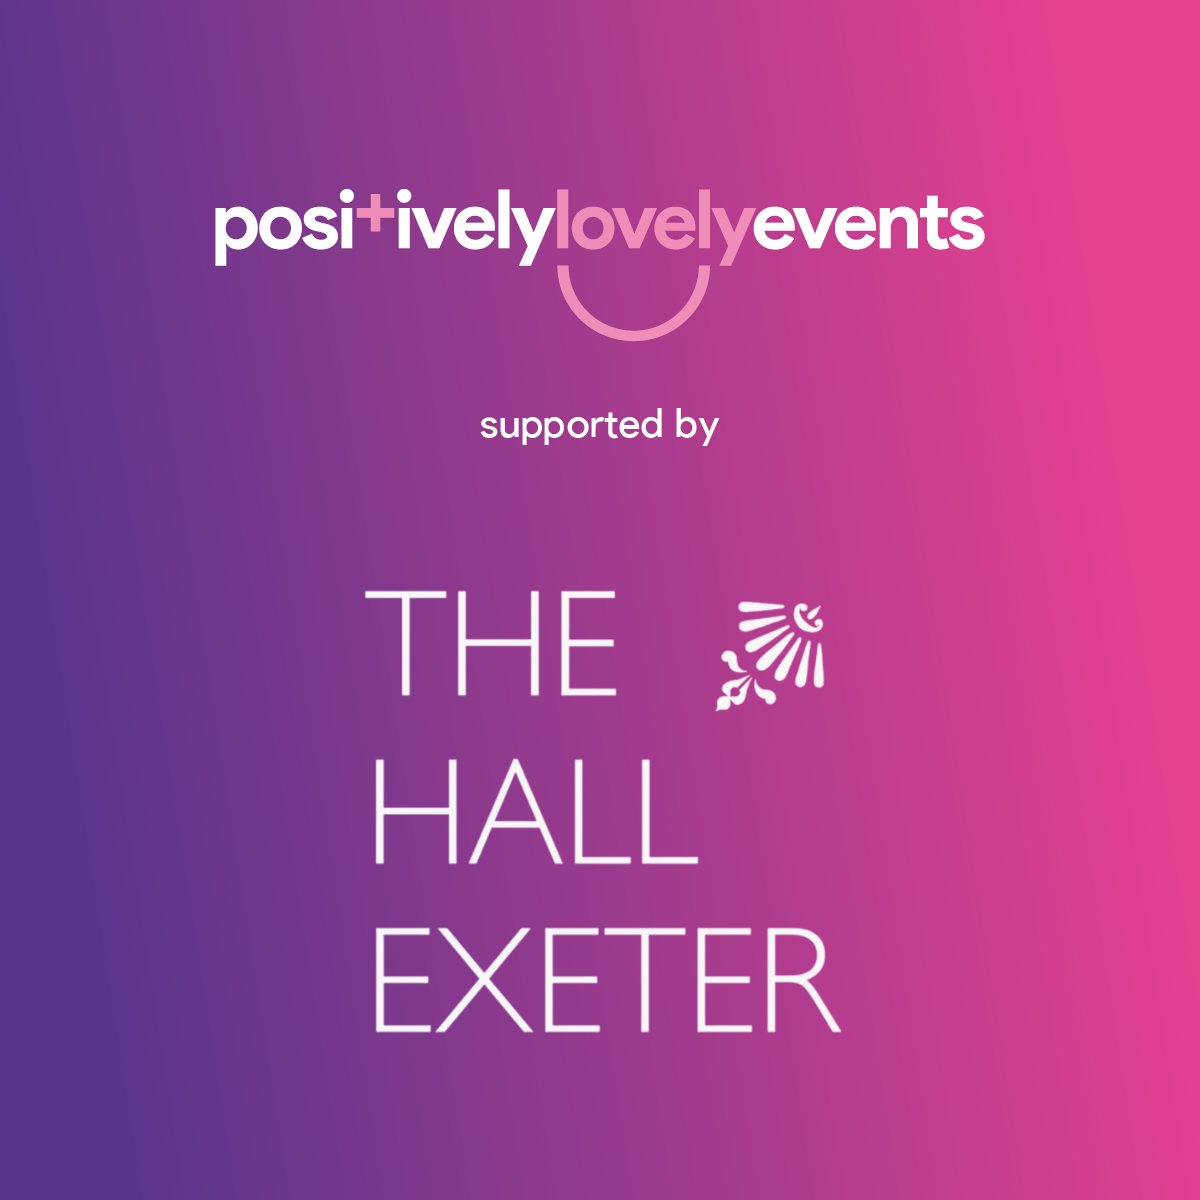 Join us at the @PositivelyTMM event at The Hall in Exeter on 5th July! Our Partner, Henry Sanford, will be joined by Jaye Cowle from @launchonlineuk to discuss the importance of #SustainableComms within #marketing. Register for free below 👇 themarketingmeetup.com/events/exeter